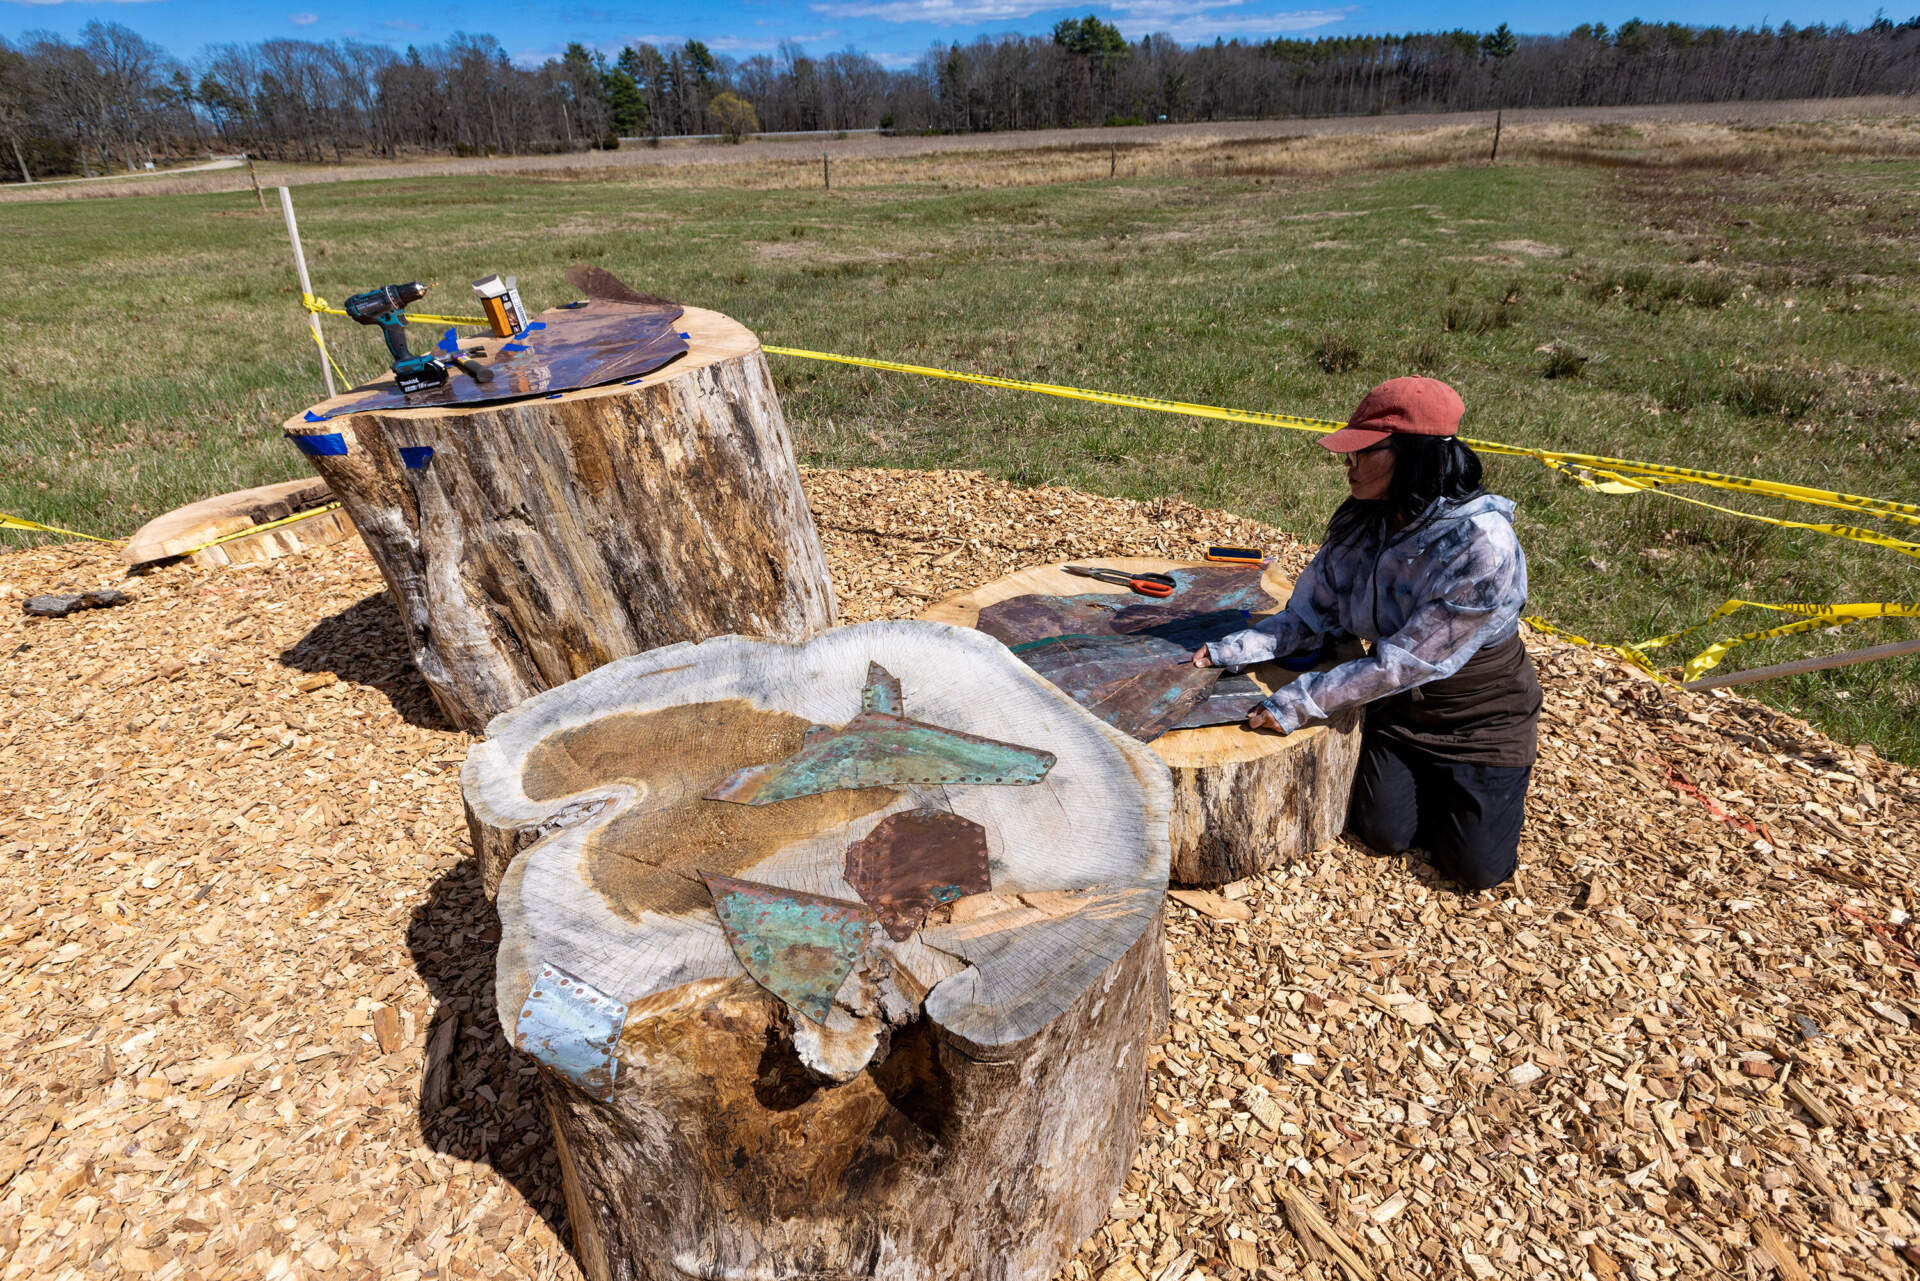 Artist Jean Shin works on one of the human perches of her exhibit at Appleton Farms, “Perch.” (Jesse Costa/WBUR)